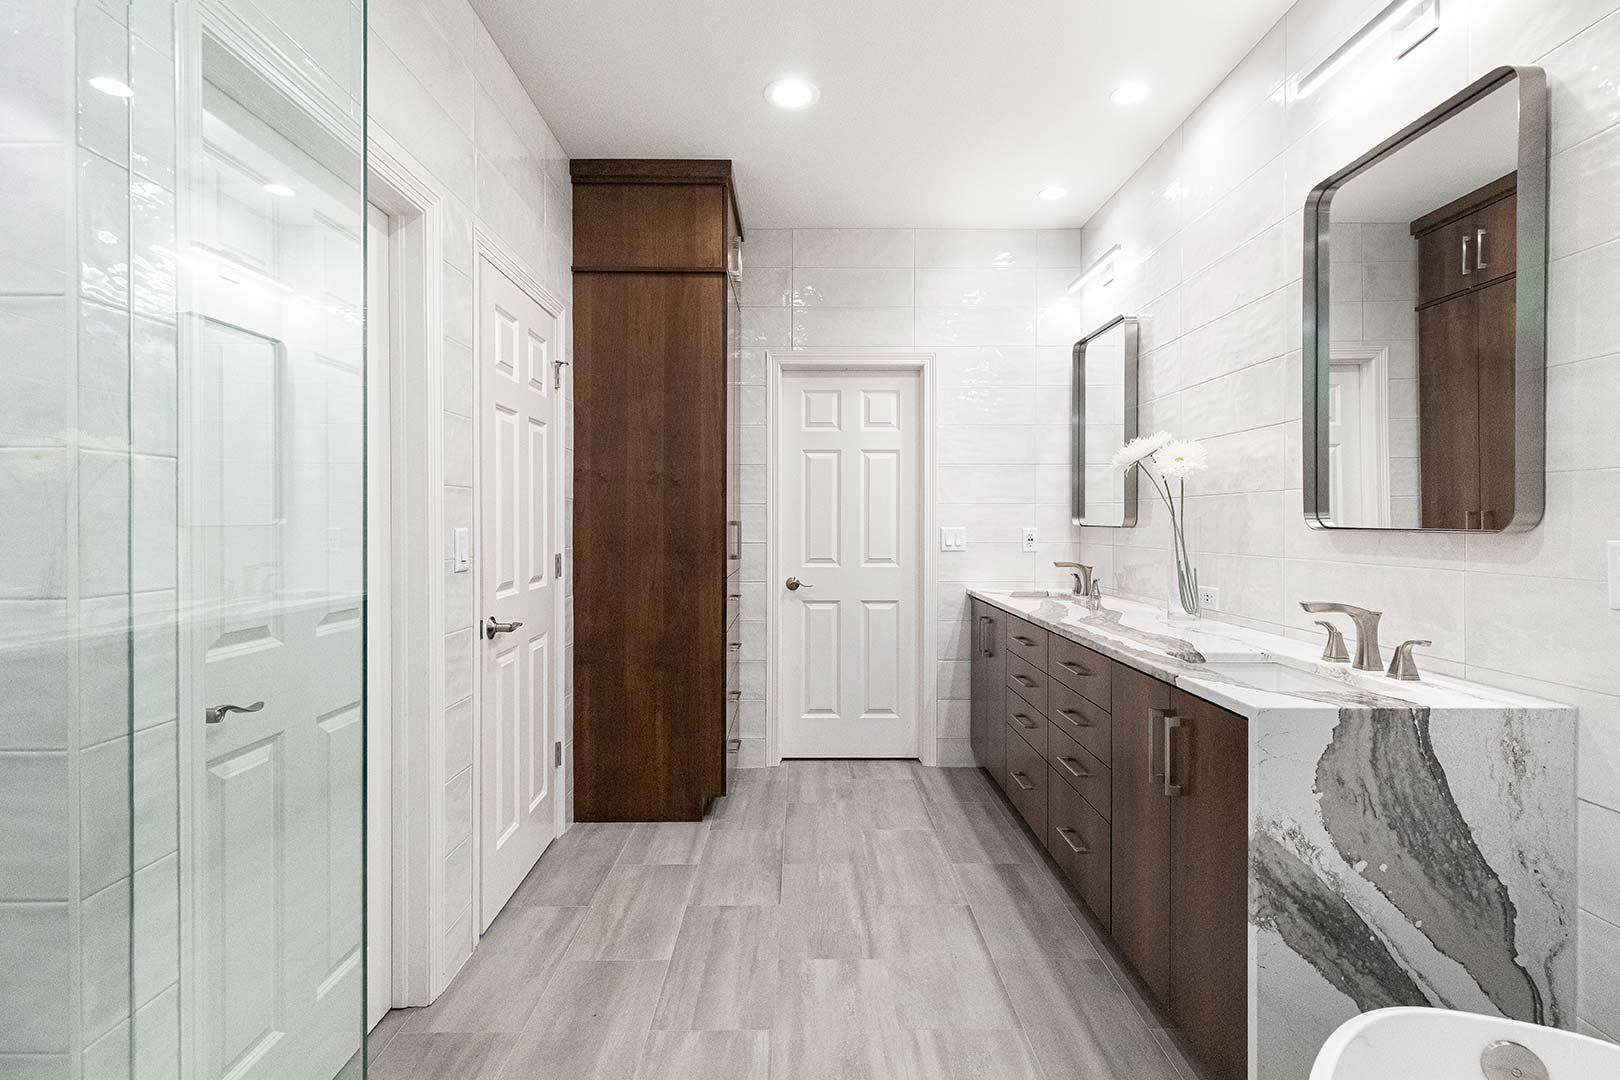 Custom cabinetry that adds storage space sits across from a double vanity in this contemporary bathroom renovation in Fort Collins Colorado.